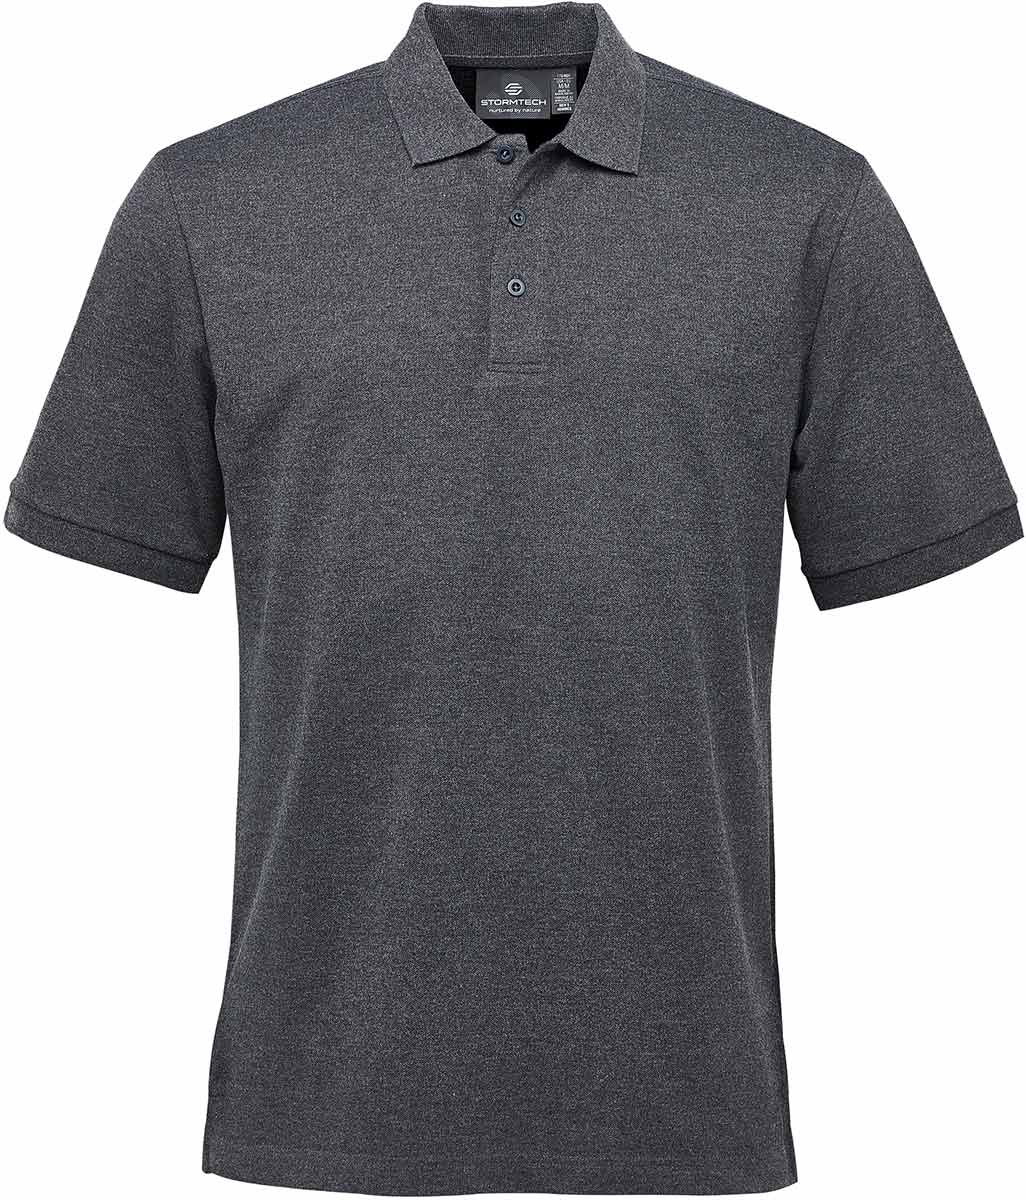 CTP-2 Polo Nantucket stretch pour homme